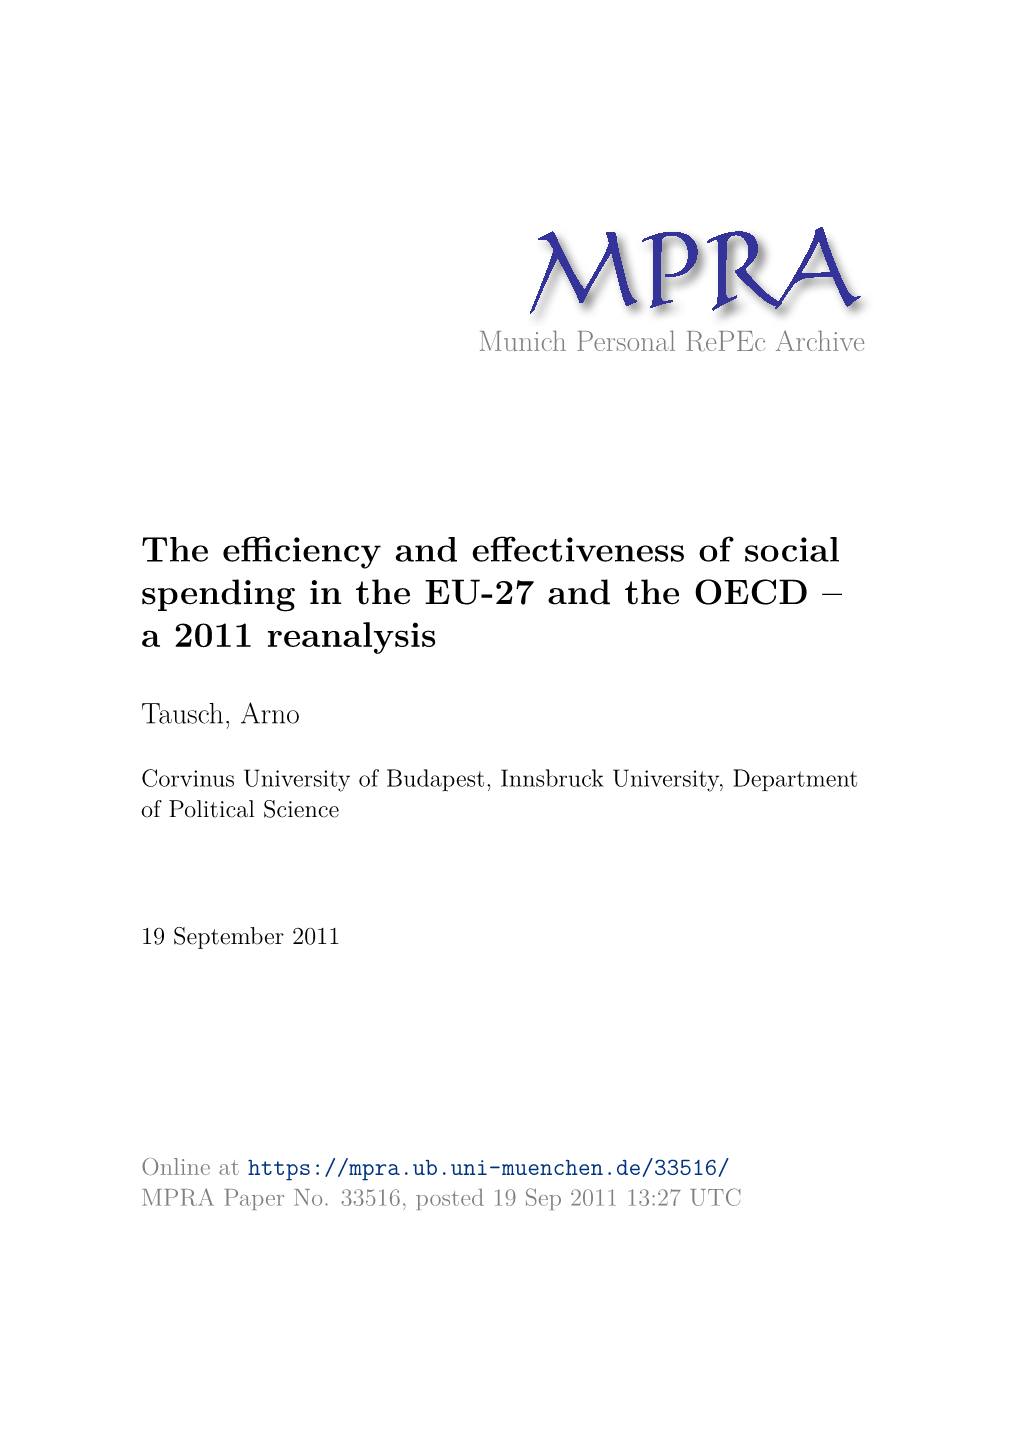 The Efficiency and Effectiveness of Social Spending in the EU-27 and the OECD – a 2011 Reanalysis